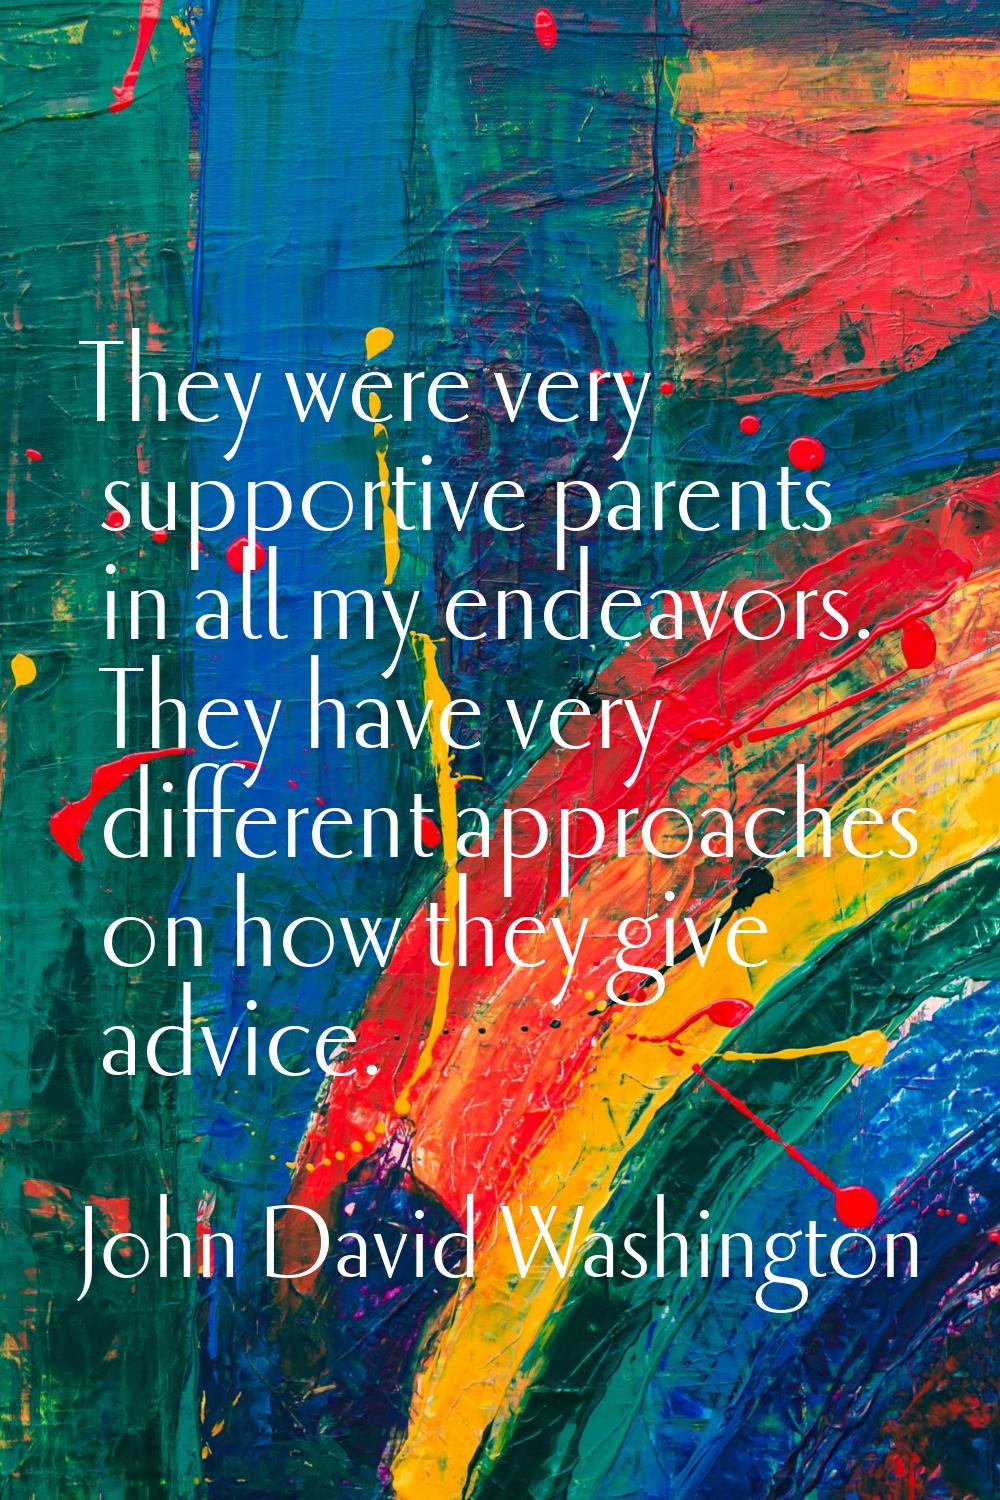 They were very supportive parents in all my endeavors. They have very different approaches on how t